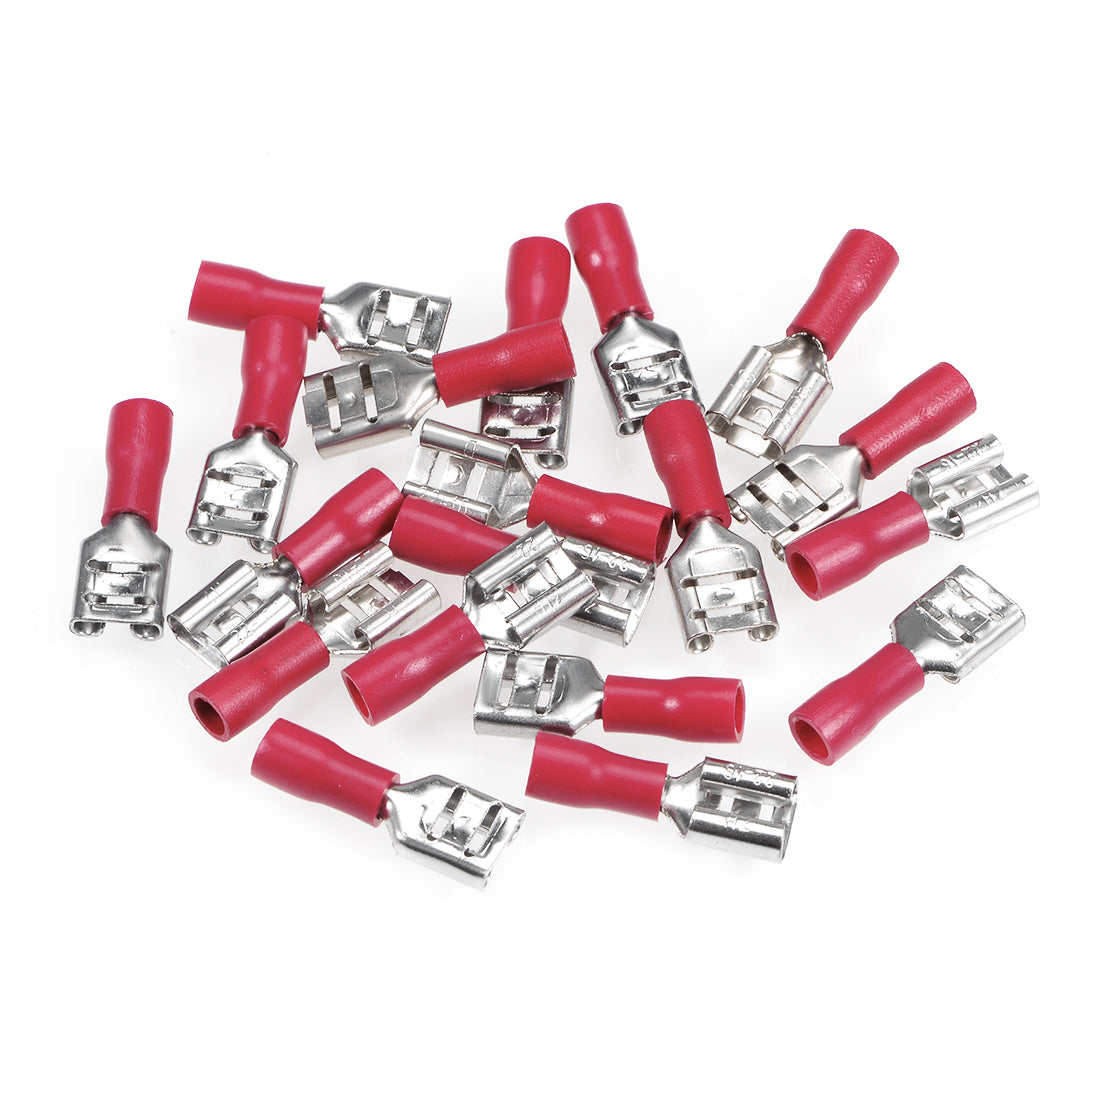 uxcell Uxcell FDD2-250 Female Insulated Spade Wire Connector Electrical Crimp Terminal Red for 18-22 AWG , 20 Pcs